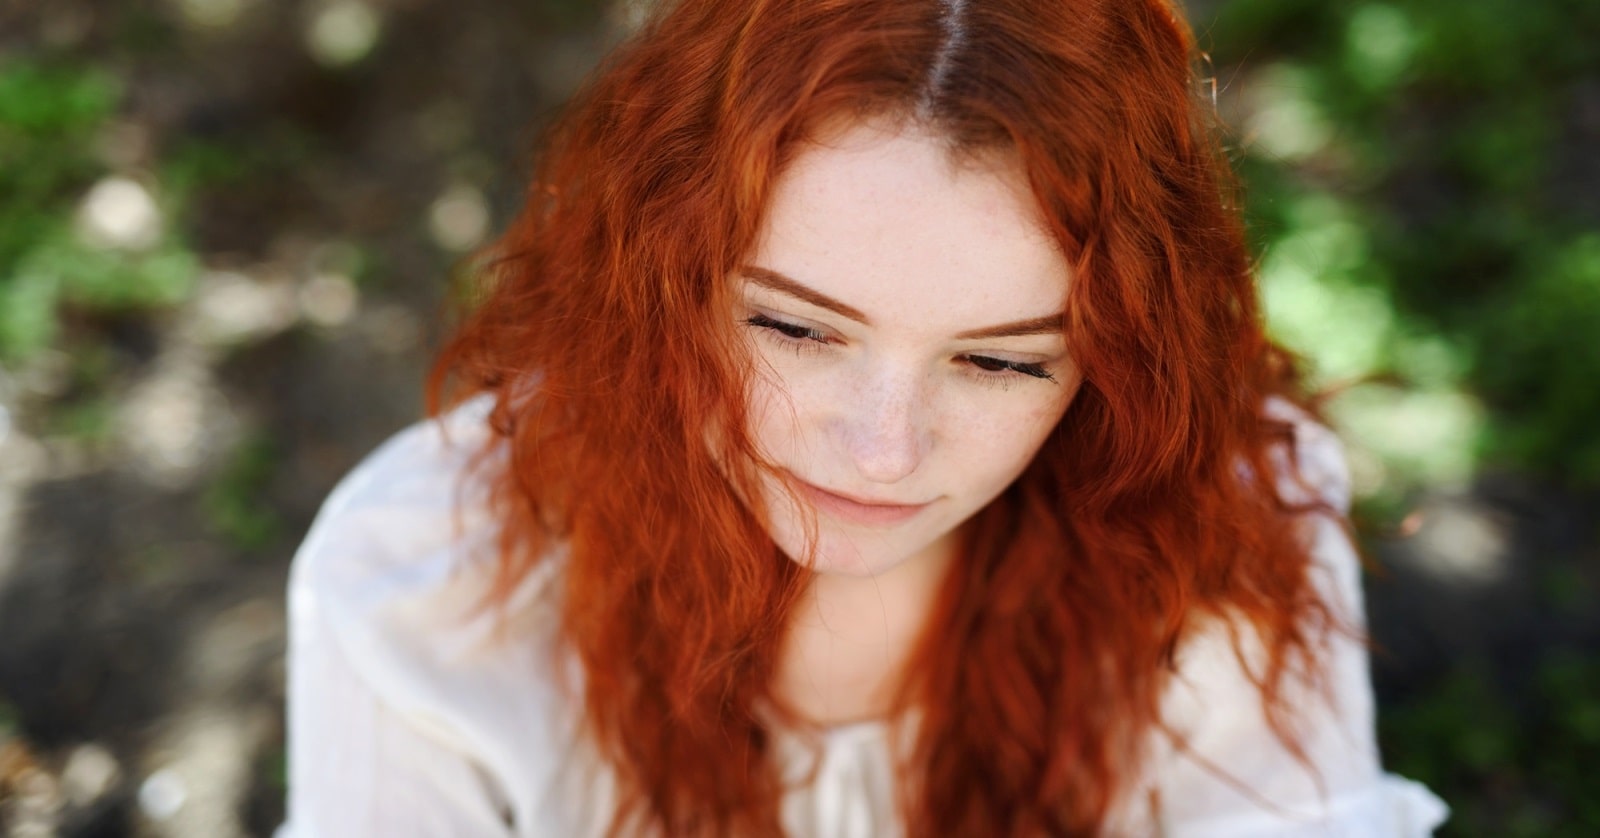 young red head woman wearing a white blouse looking down in a manner that suggests a lack of self-respect.